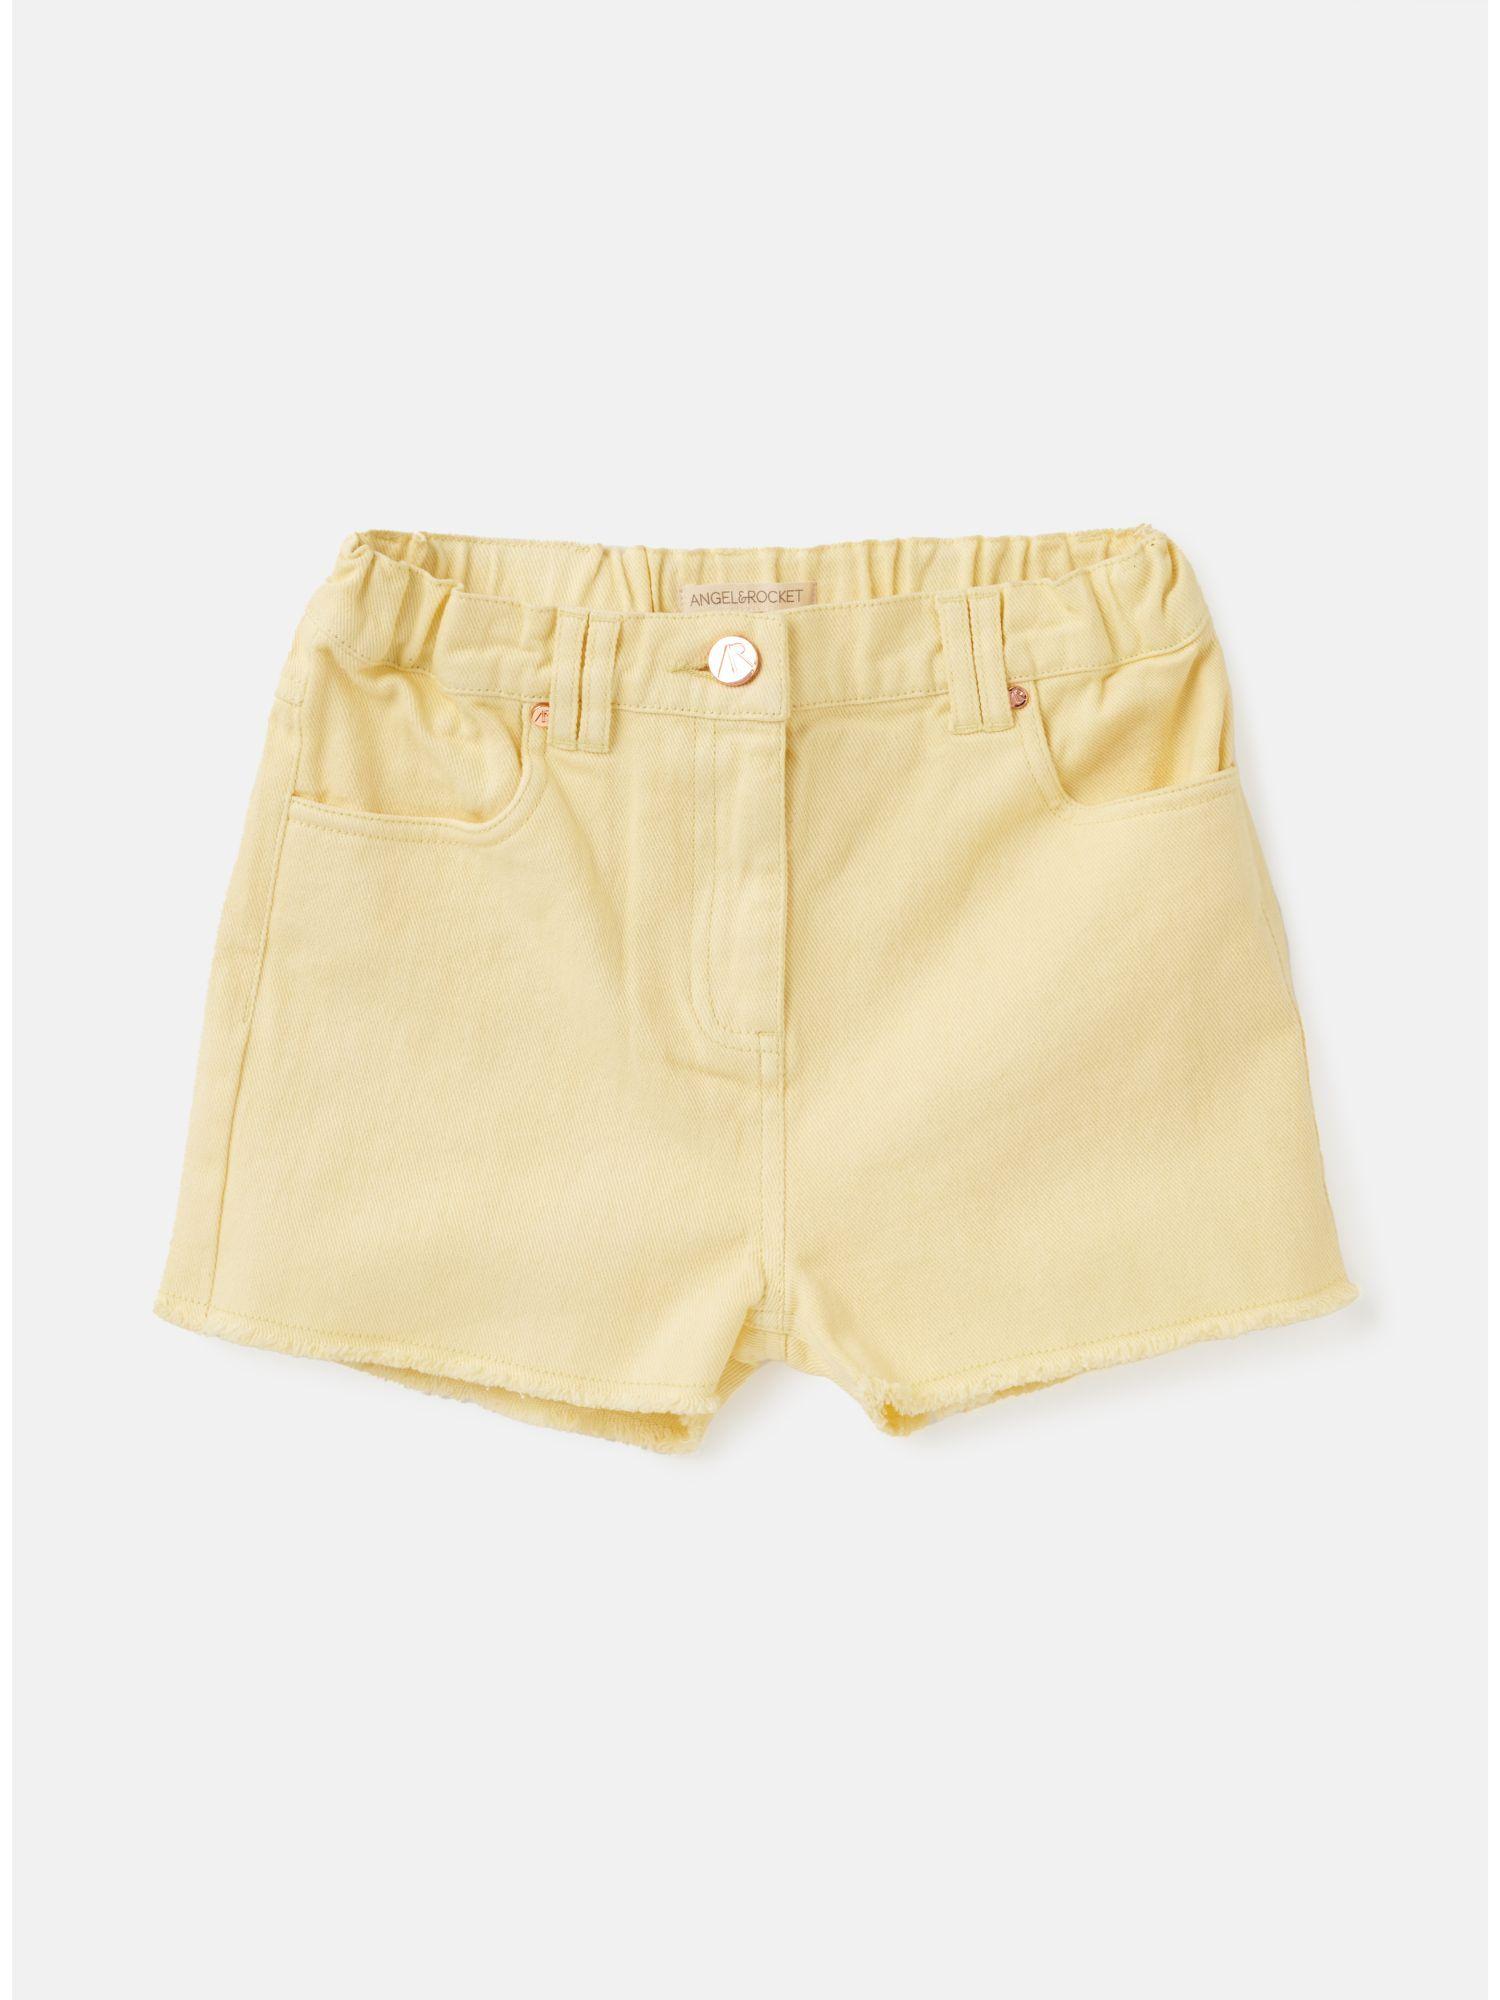 solid yellow shorts